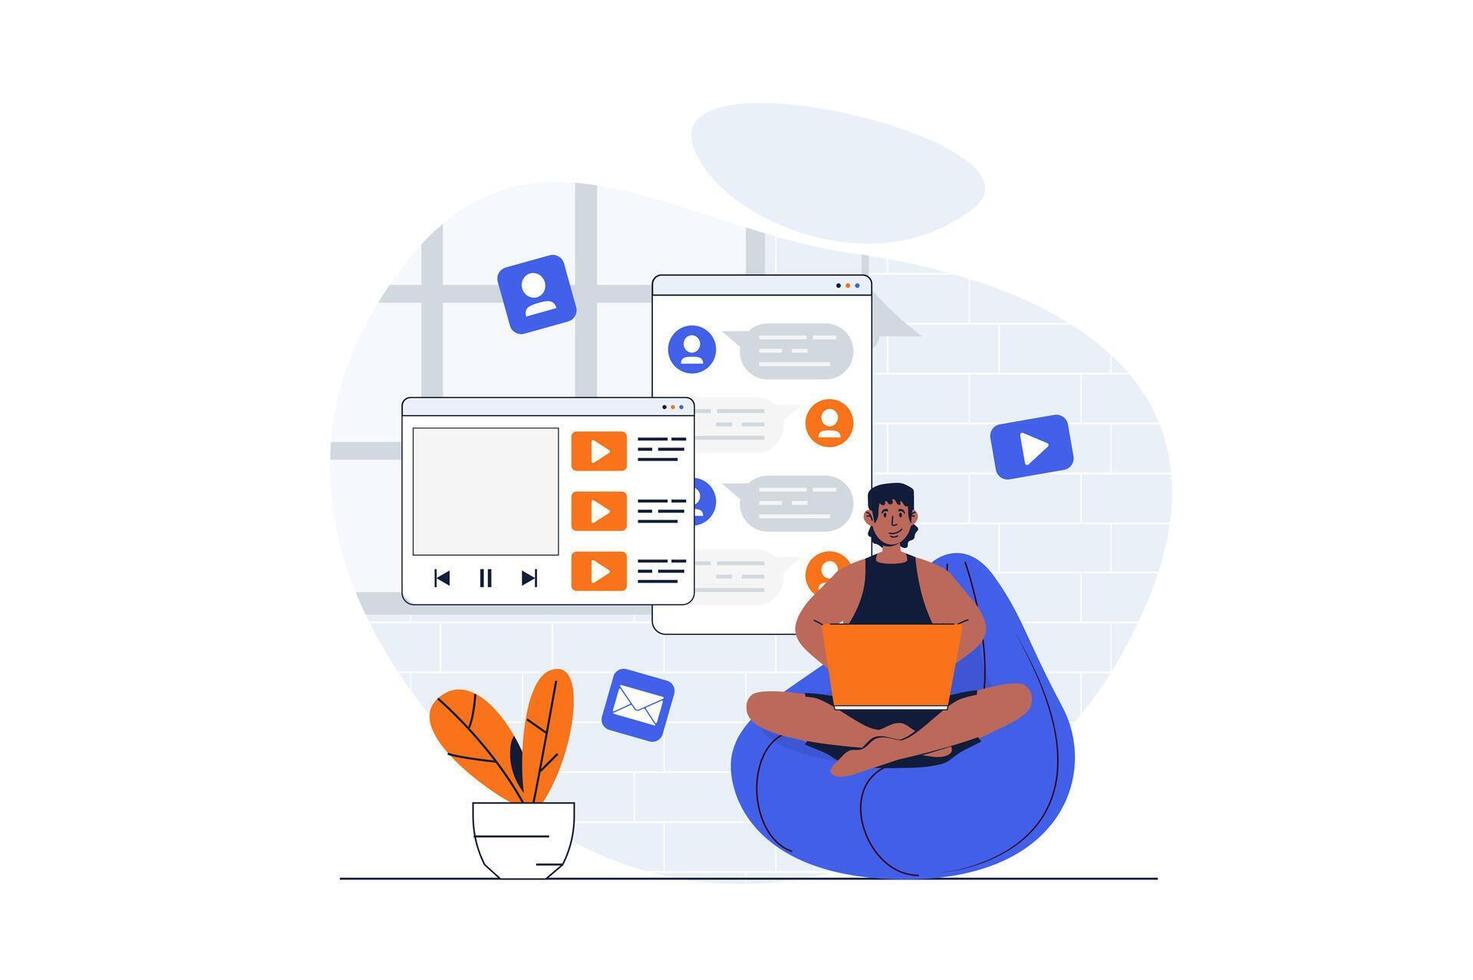 Social network web concept with character scene. Man watching video content, sharing and chatting friends. People situation in flat design. Vector illustration for social media marketing material.